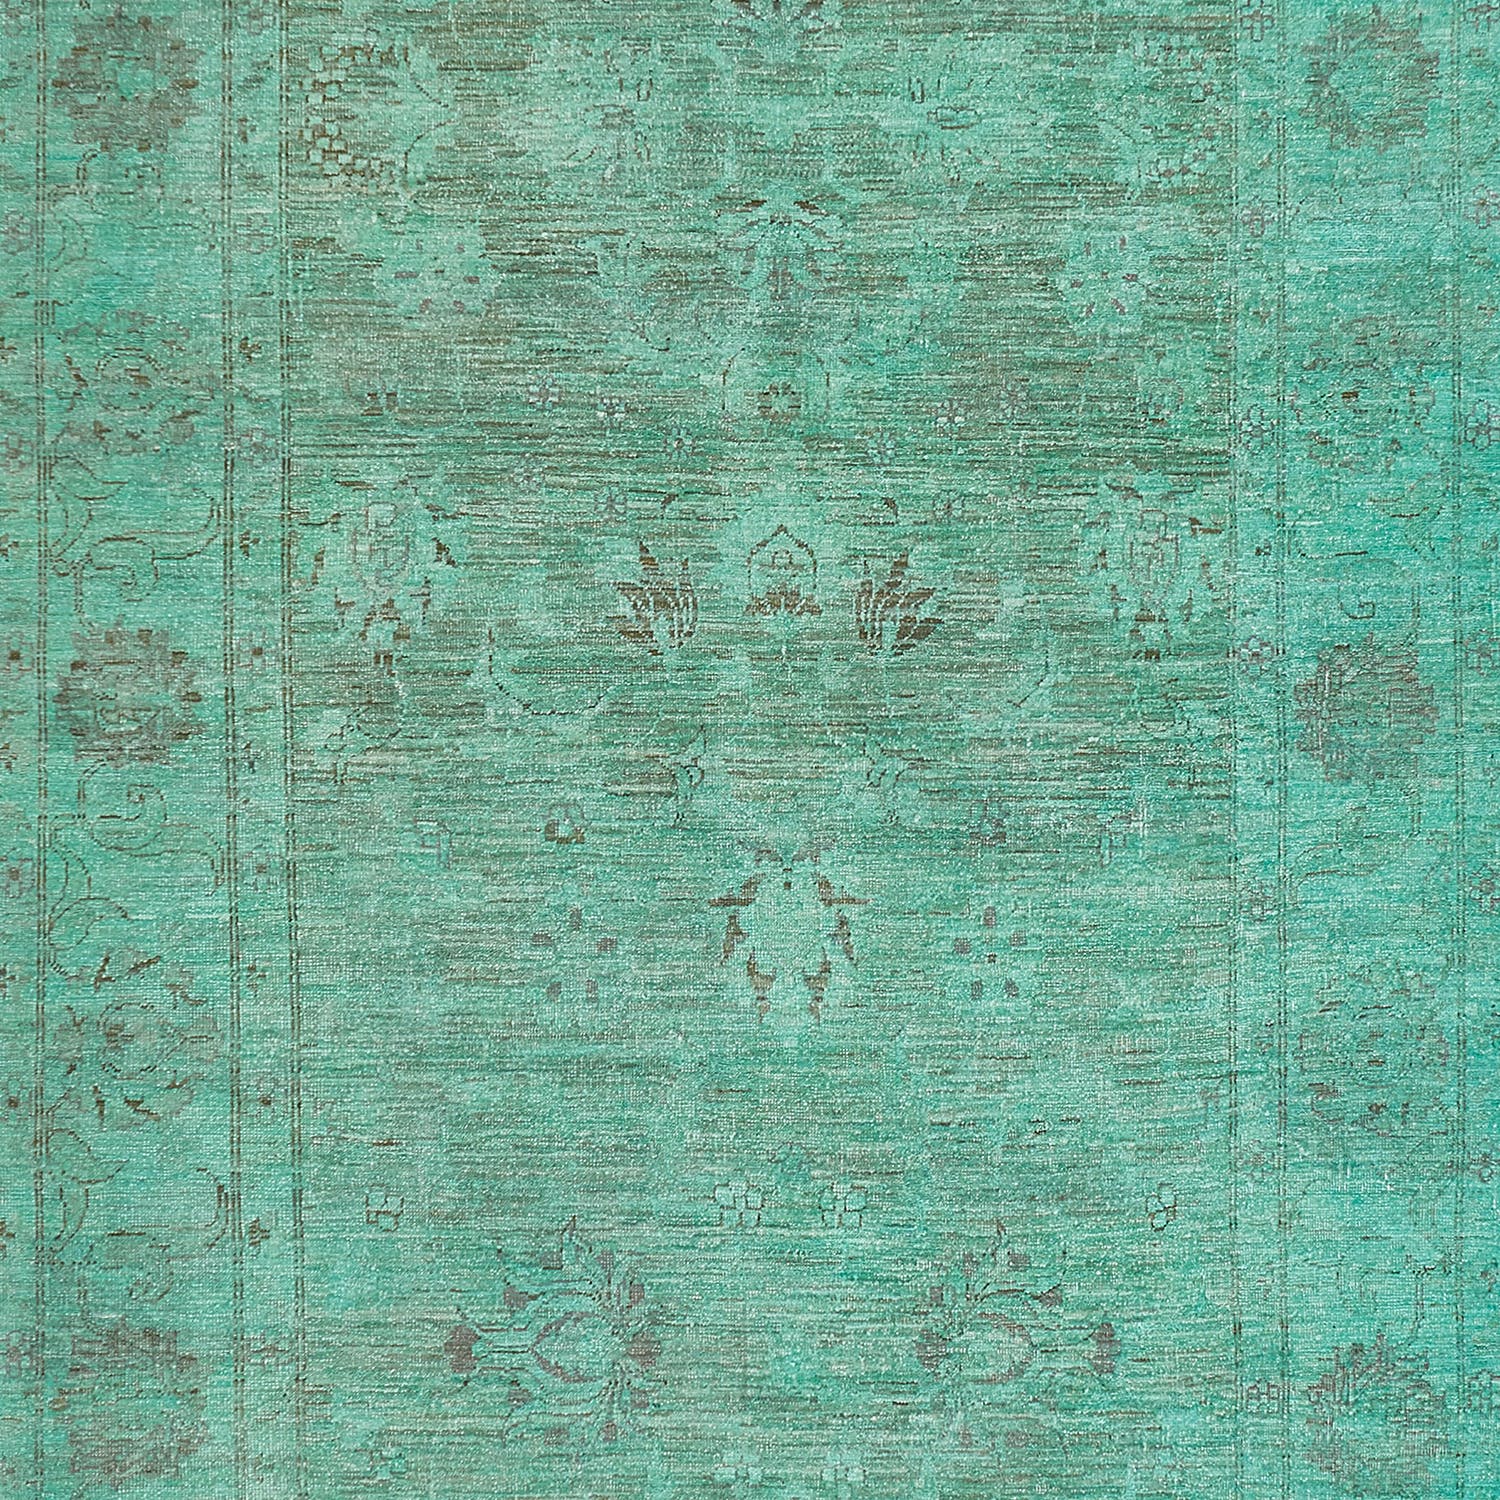 Vintage turquoise textured surface with distressed patterns for artistic projects.